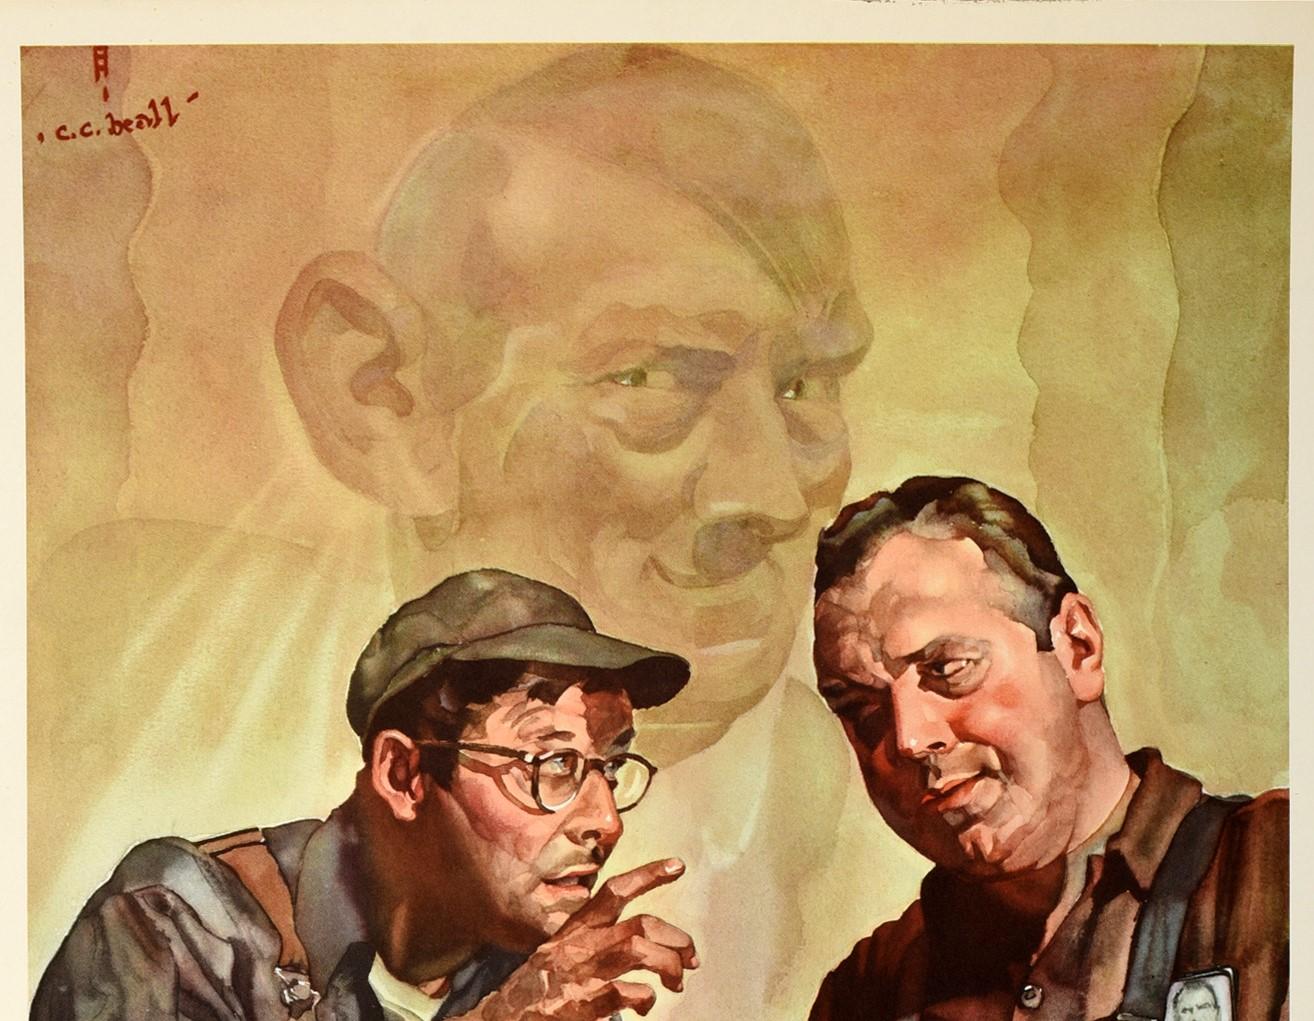 Original vintage World War Two propaganda poster - Loose Talk Can Cost Lives Don't Be a Dope and Spread Inside Dope - featuring great artwork by the American commercial illustrator and portrait painter Cecil Calvert Beall (1892-1970) showing two